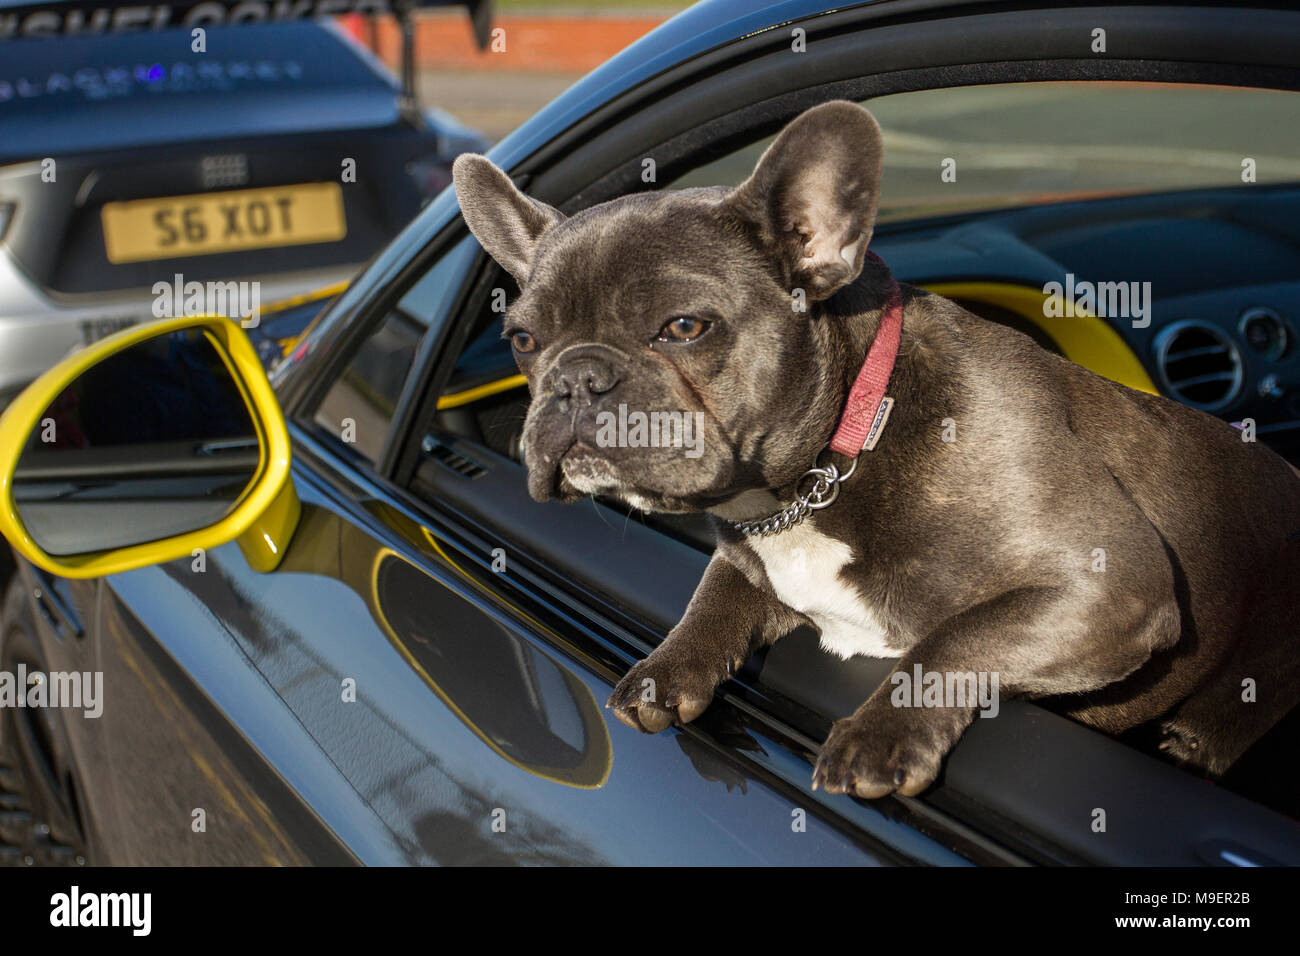 French bulldog looking out of moving car in Southport, Merseyside, UK March 2018.  UK Weather. Bright sunshine for Nort-West Supercar event as hundreds of cars and tourists arrive in the coastal resort on a warm spring day. Vogue a French Bulldog, also known as the Frenchie, a small breed of domestic dog enjoying the journey. Cars are bumper to bumper on the seafront esplanade as classic & vintage car enthusiasts take advantage of warm weather for a motoring day out. Credit: MediaWorldImages/Alamy Live News. Stock Photo